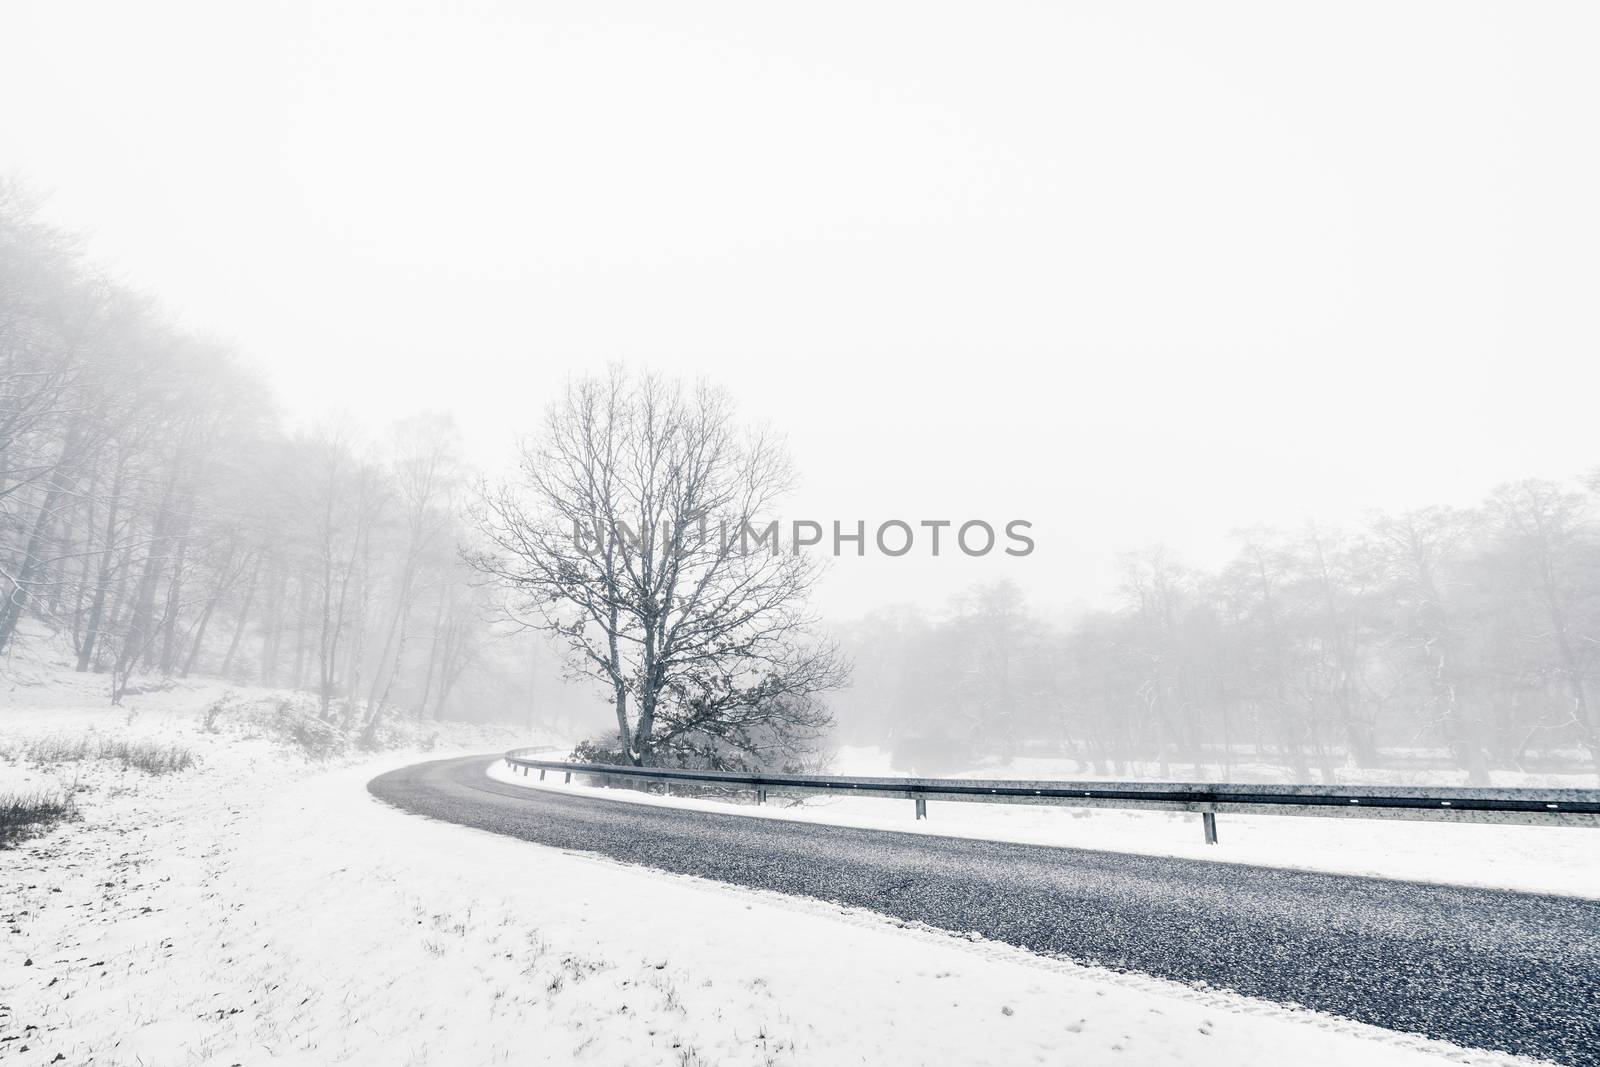 Curvy highway in a misty winter landscape by Sportactive